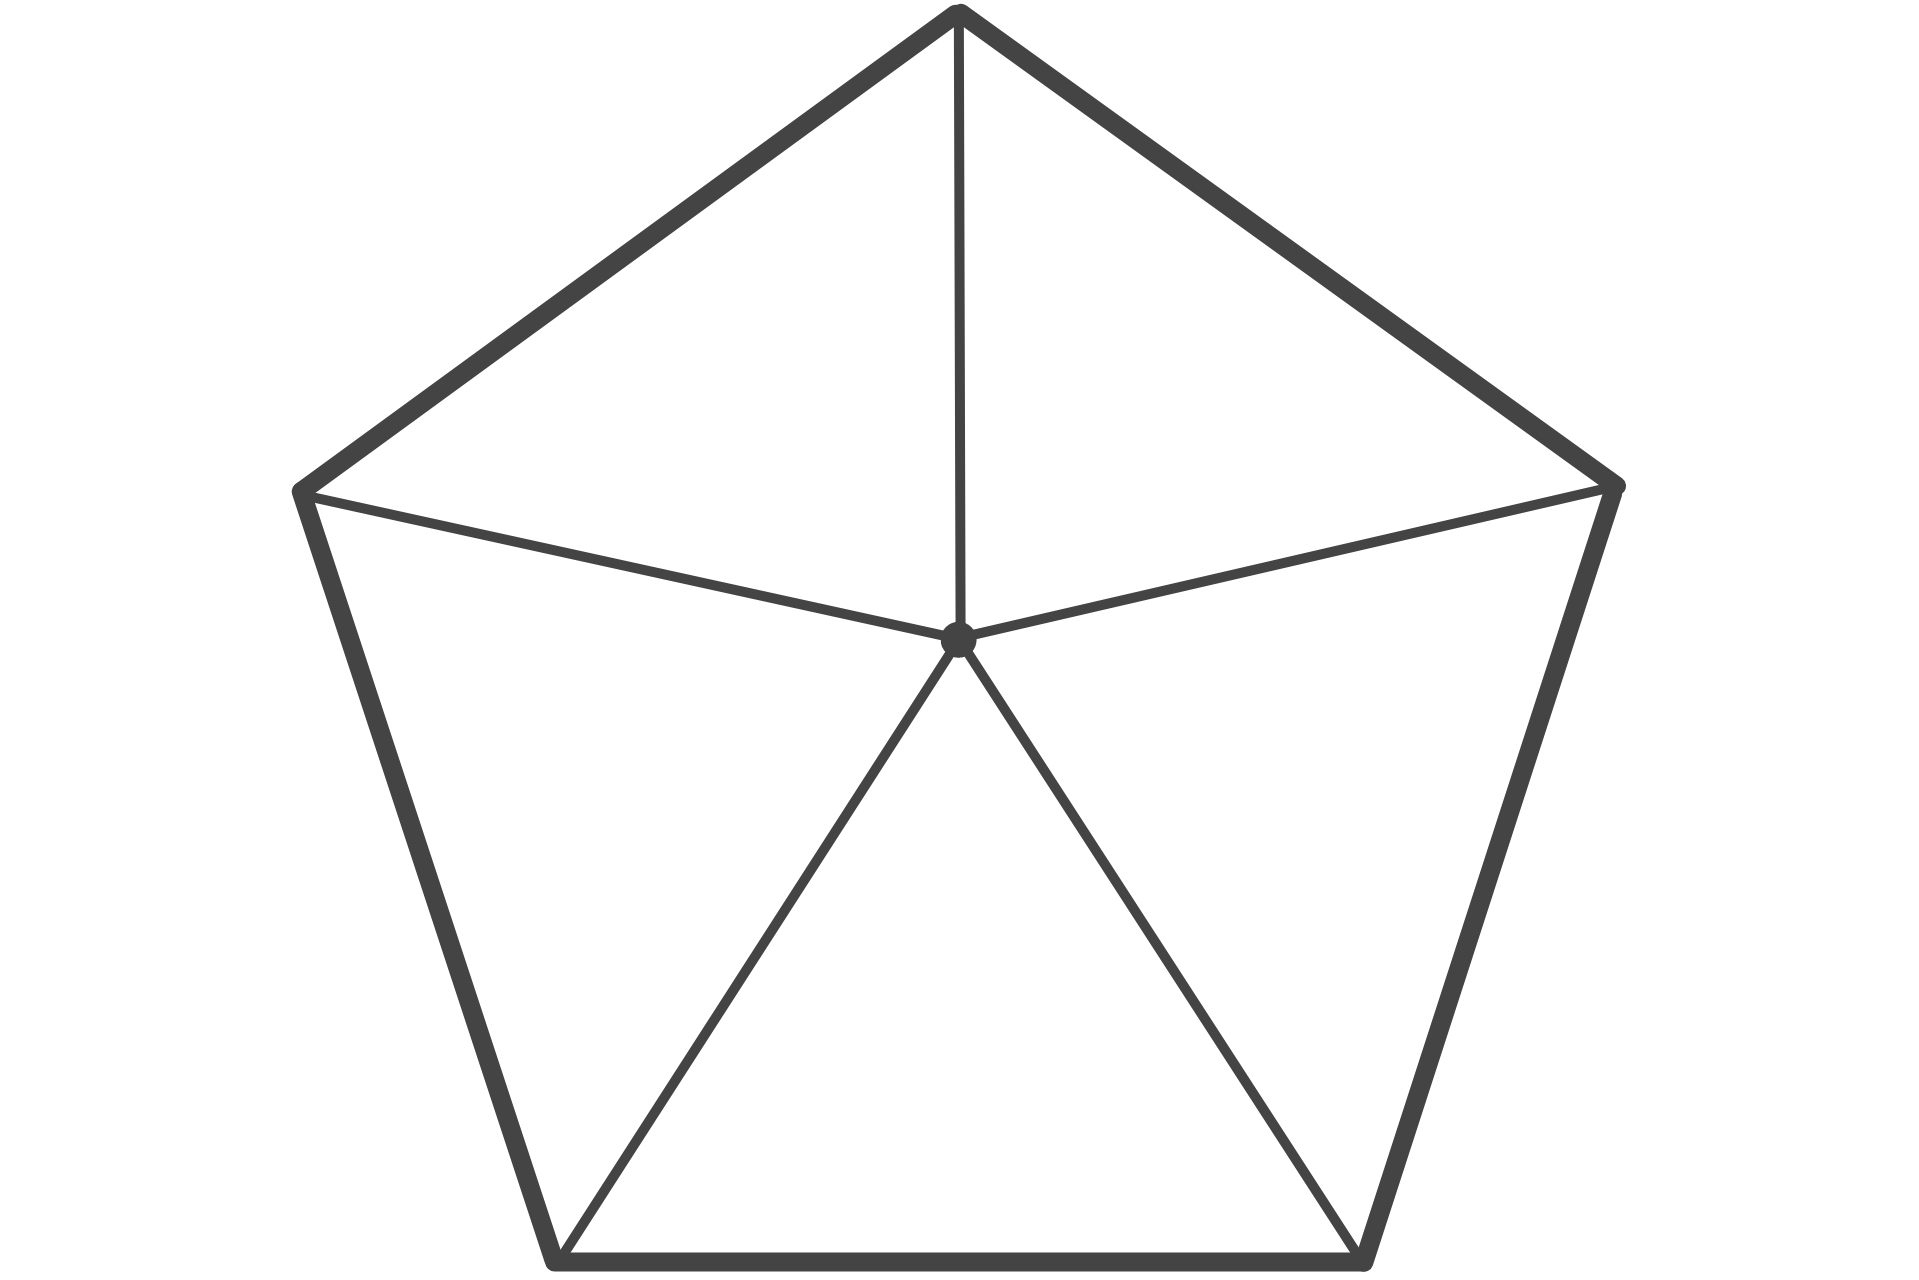 Graphic showing that a regular pentagon is composed of five isosceles triangles.